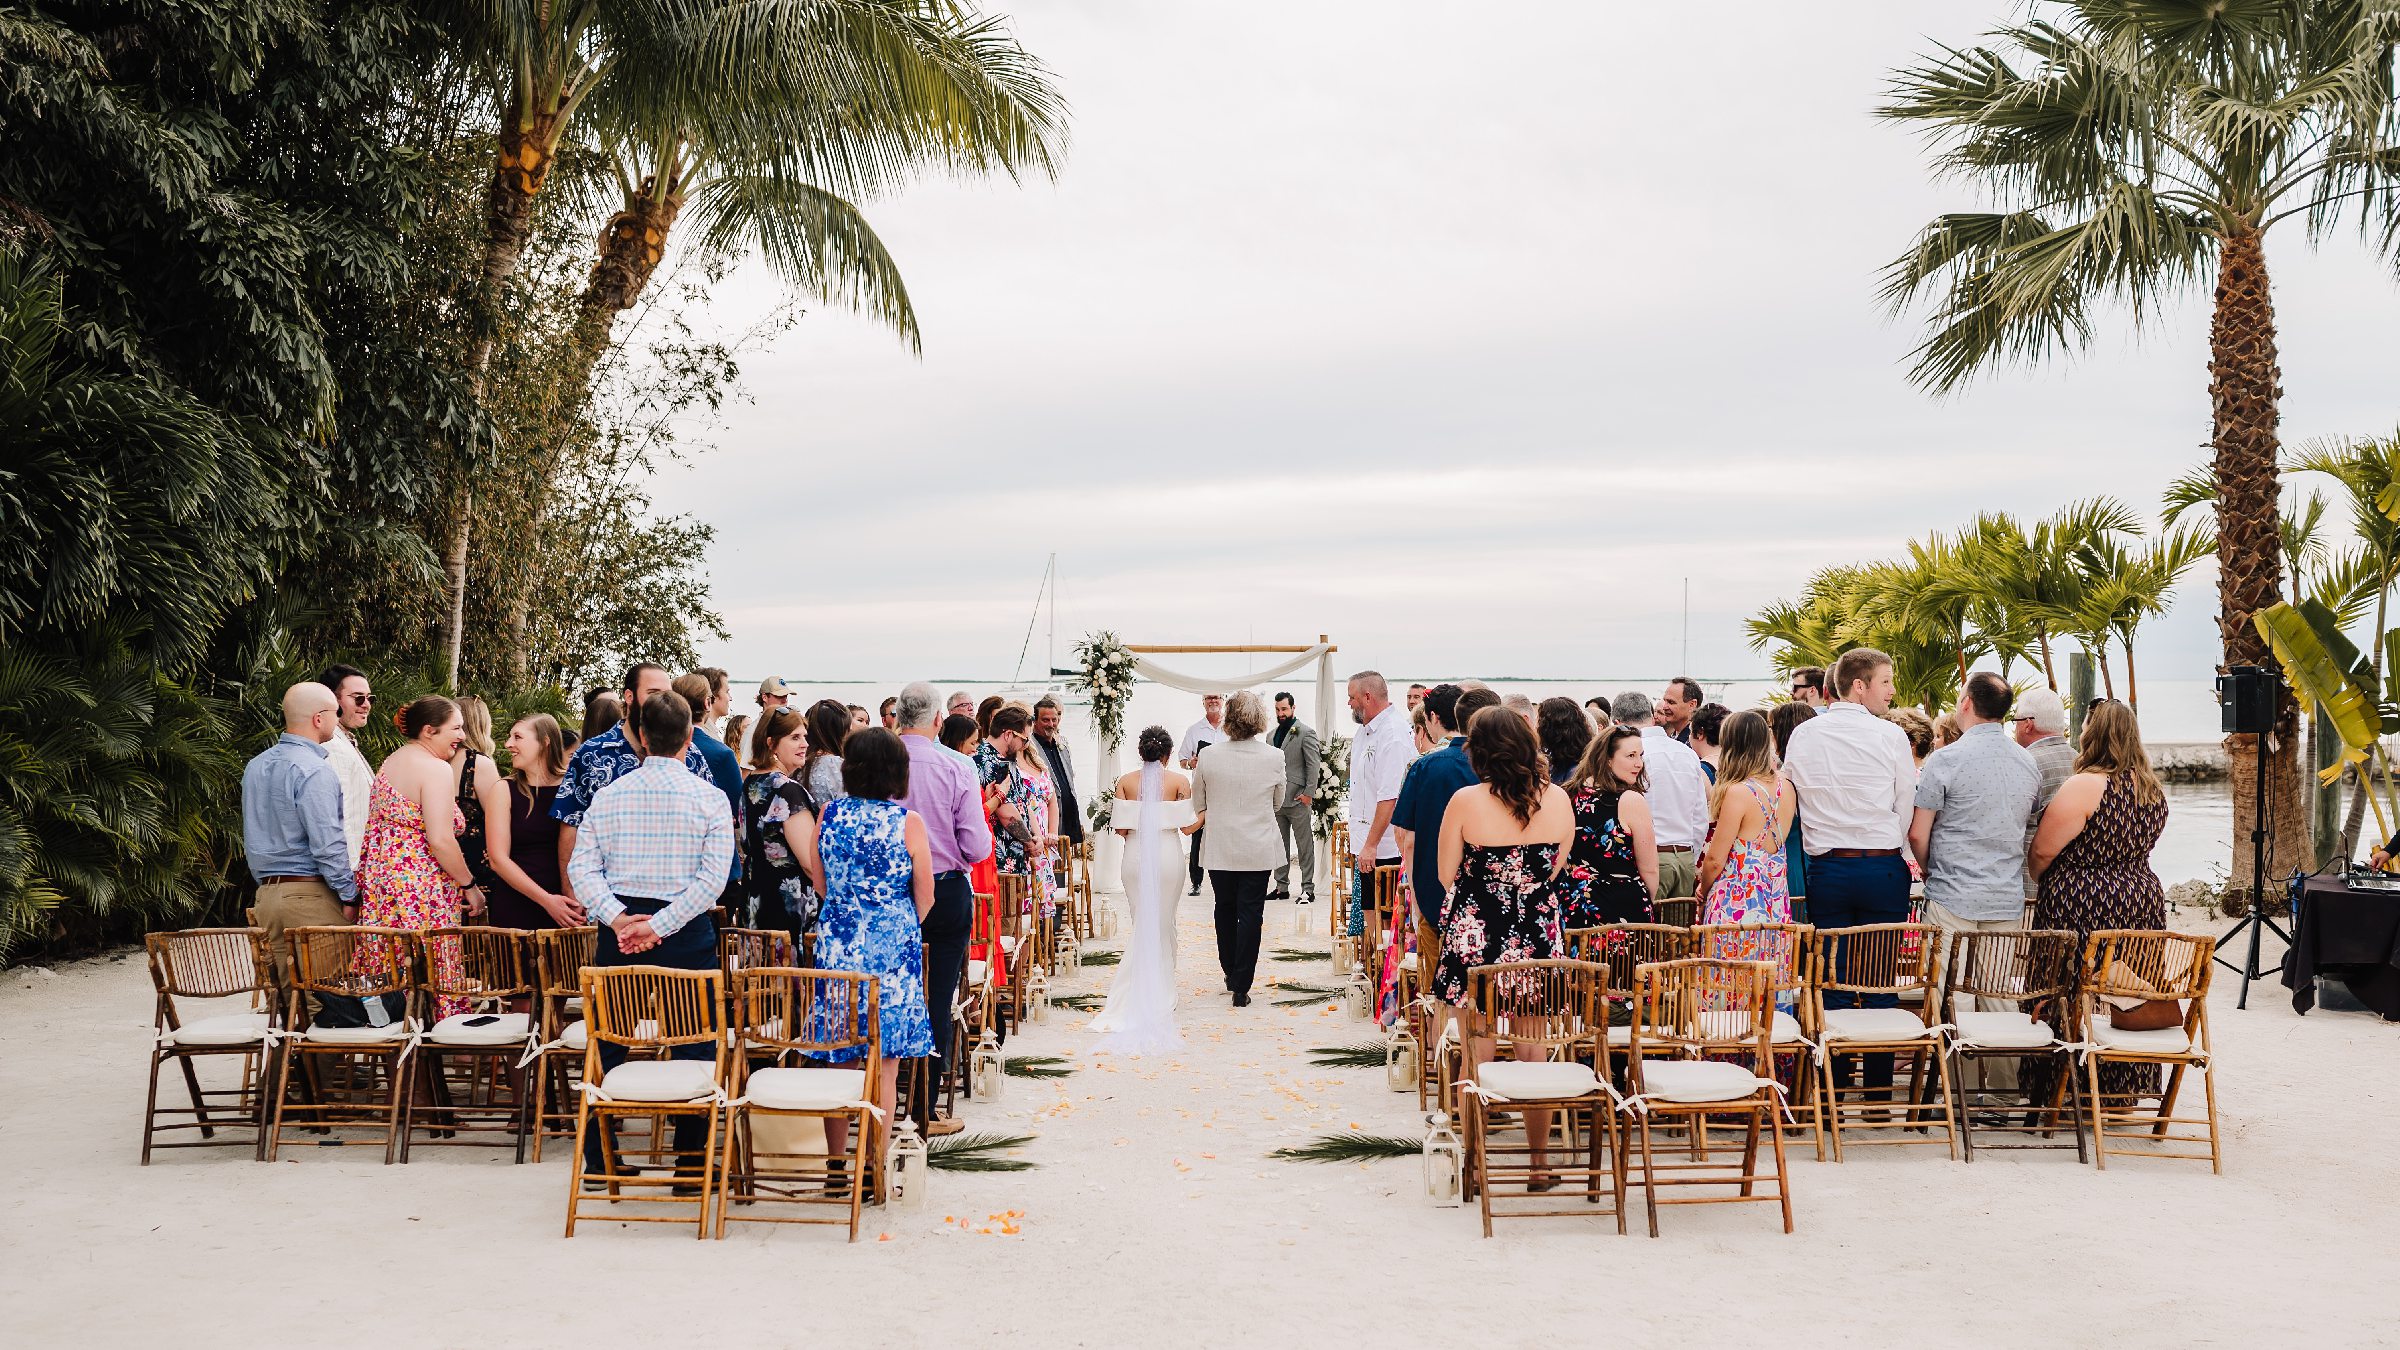 Sunset vows at a beach wedding ceremony in Key Largo, Florida.